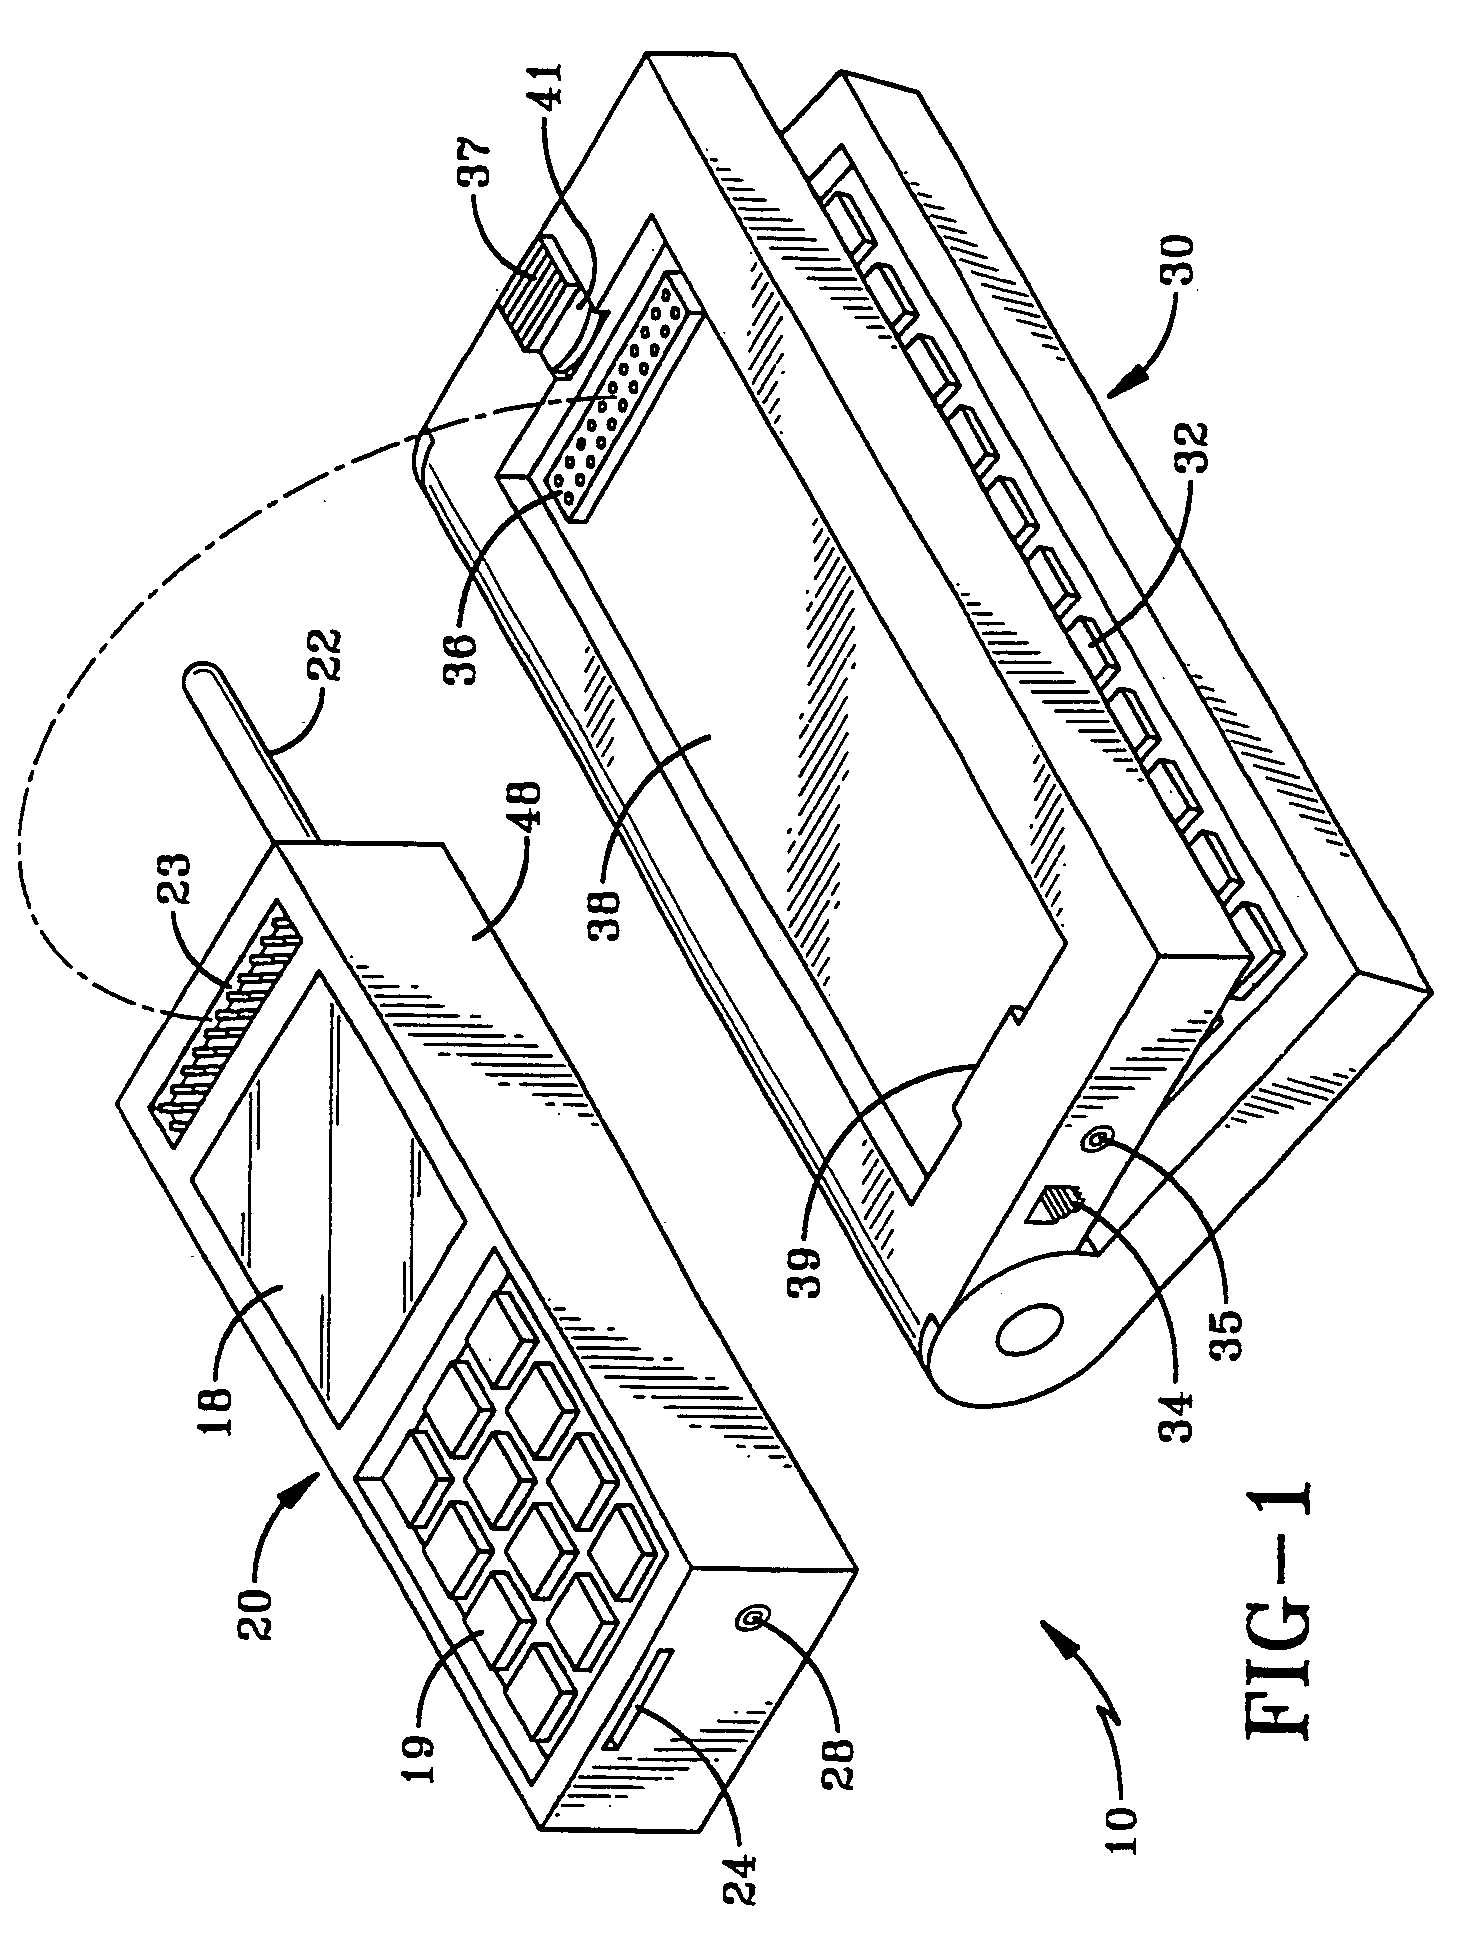 Portable computing, communication and entertainment device with central processor carried in a detachable handset